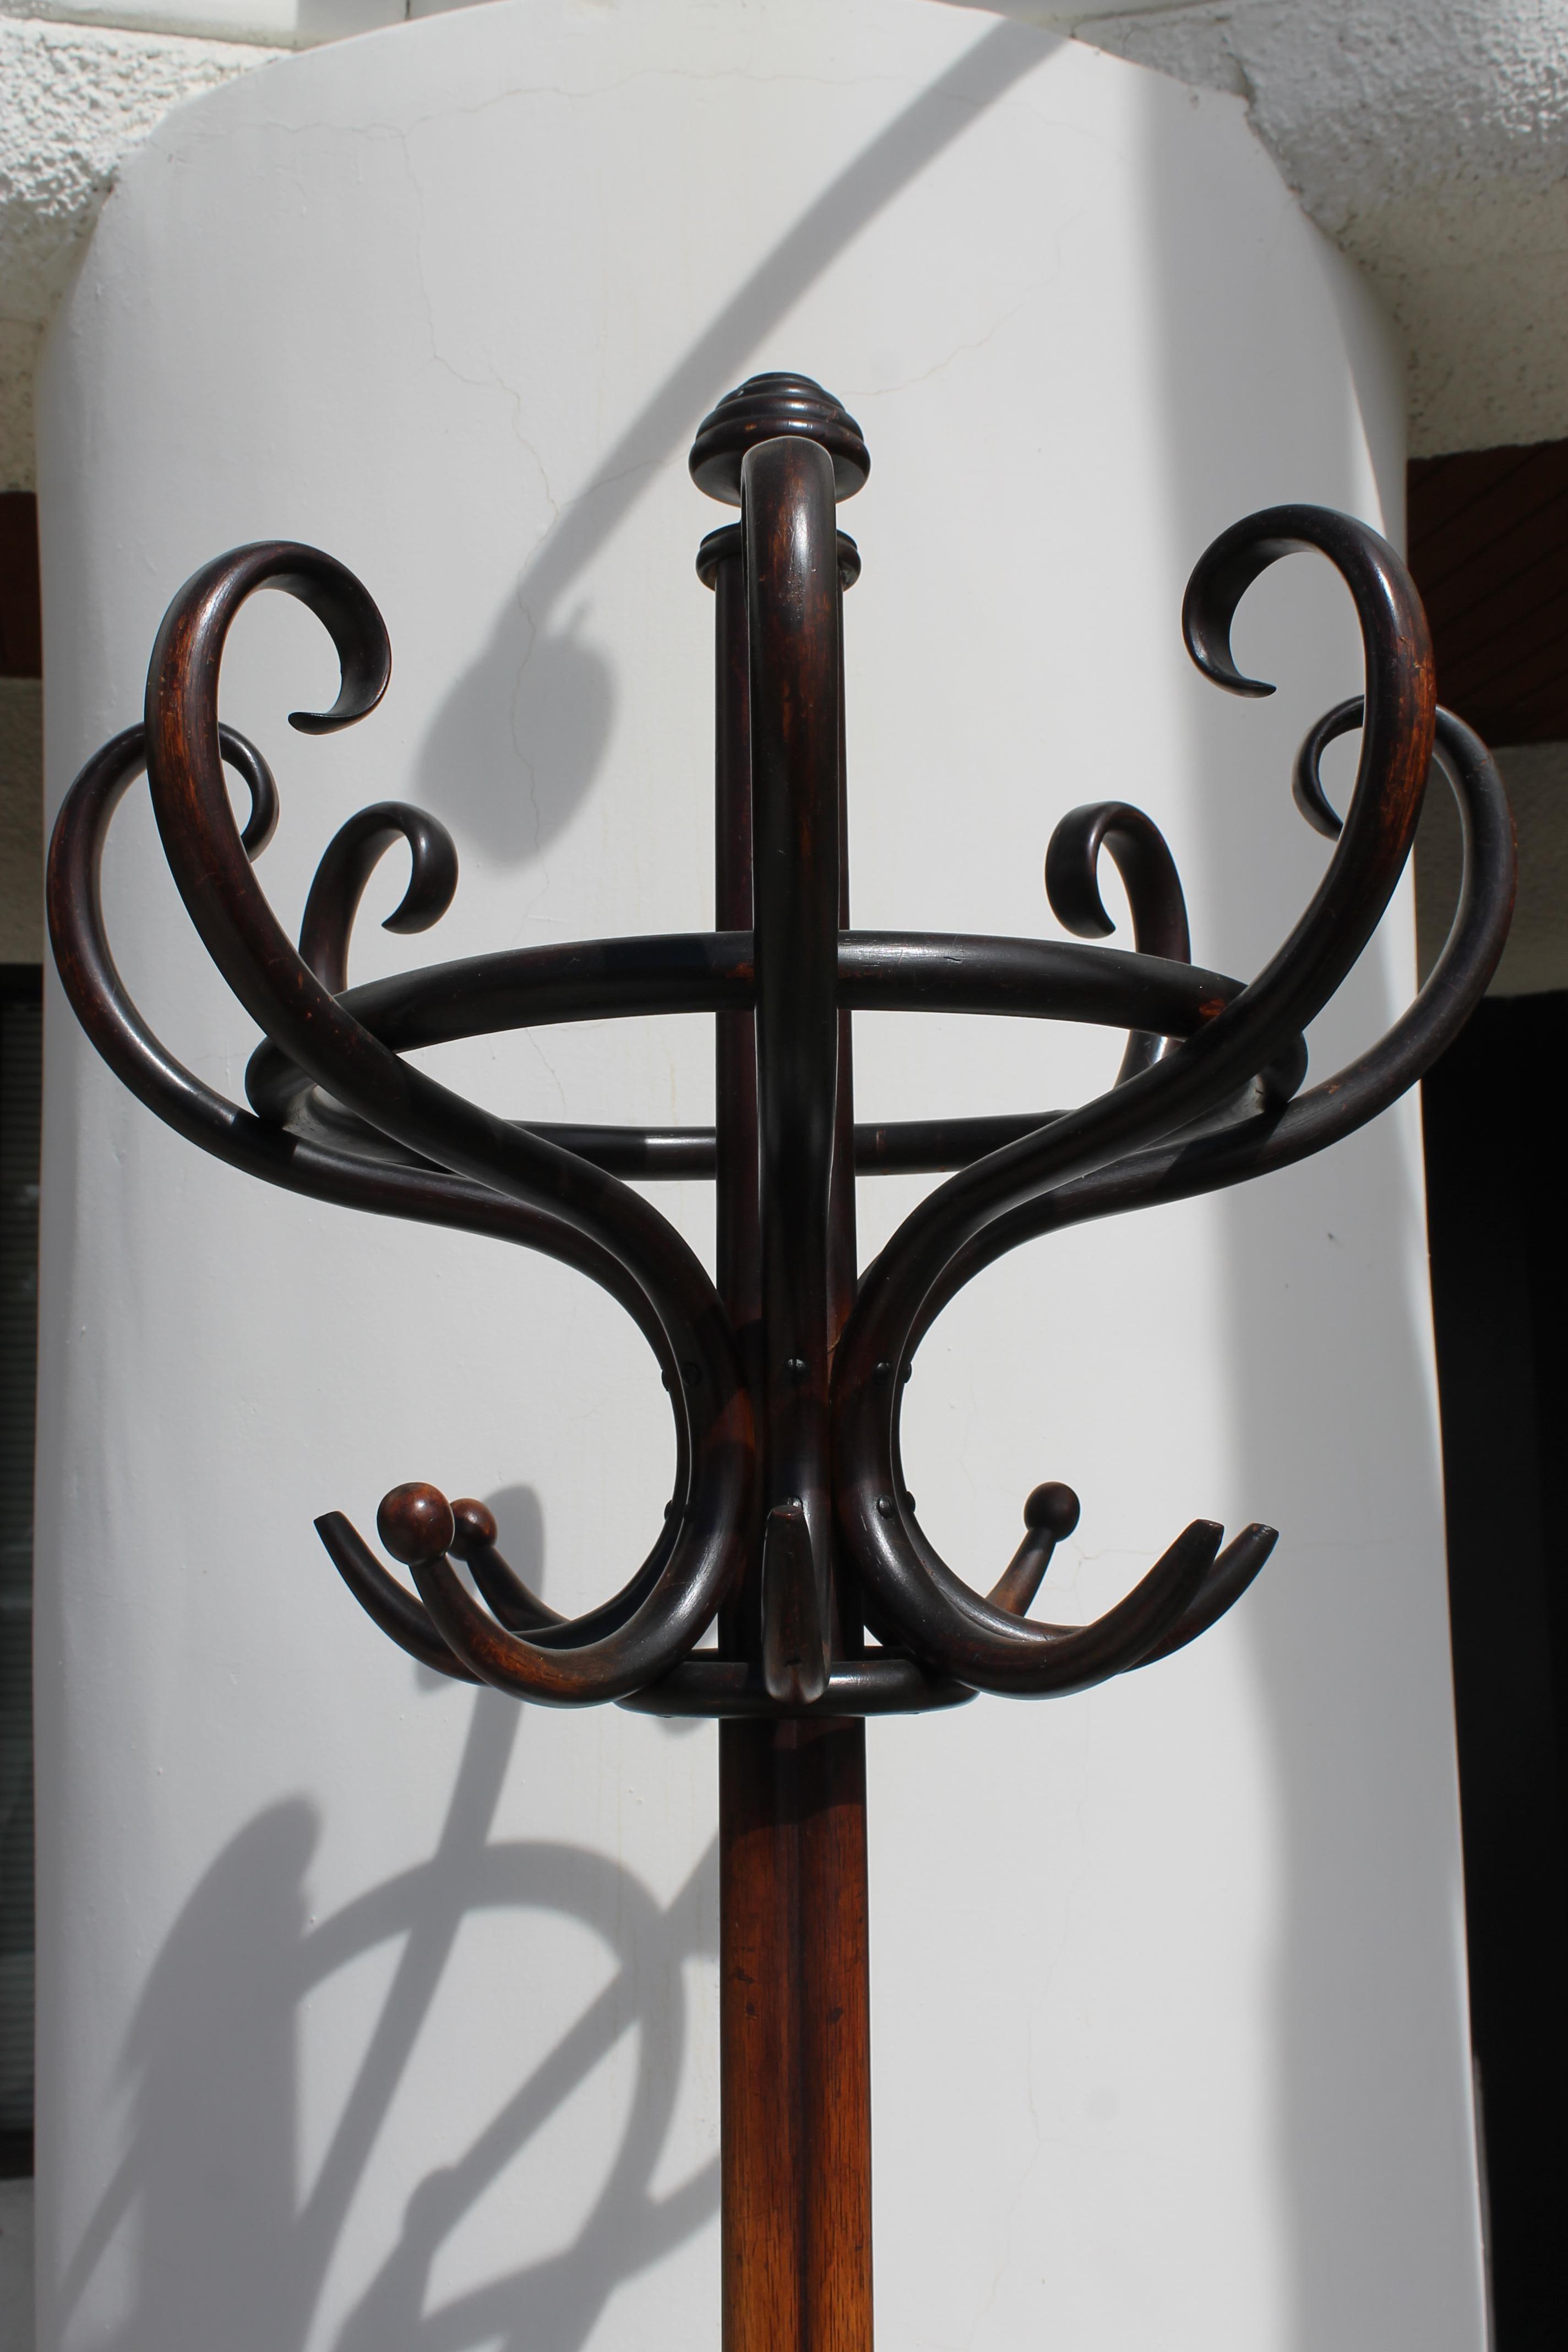 Art Nouveau-period coat/hat stand with eight S-shaped hooks by Thonet. Four of the eight hooks have the wood balls at the end. The coat rack is resting on four curved feet. Coat rack measures 28